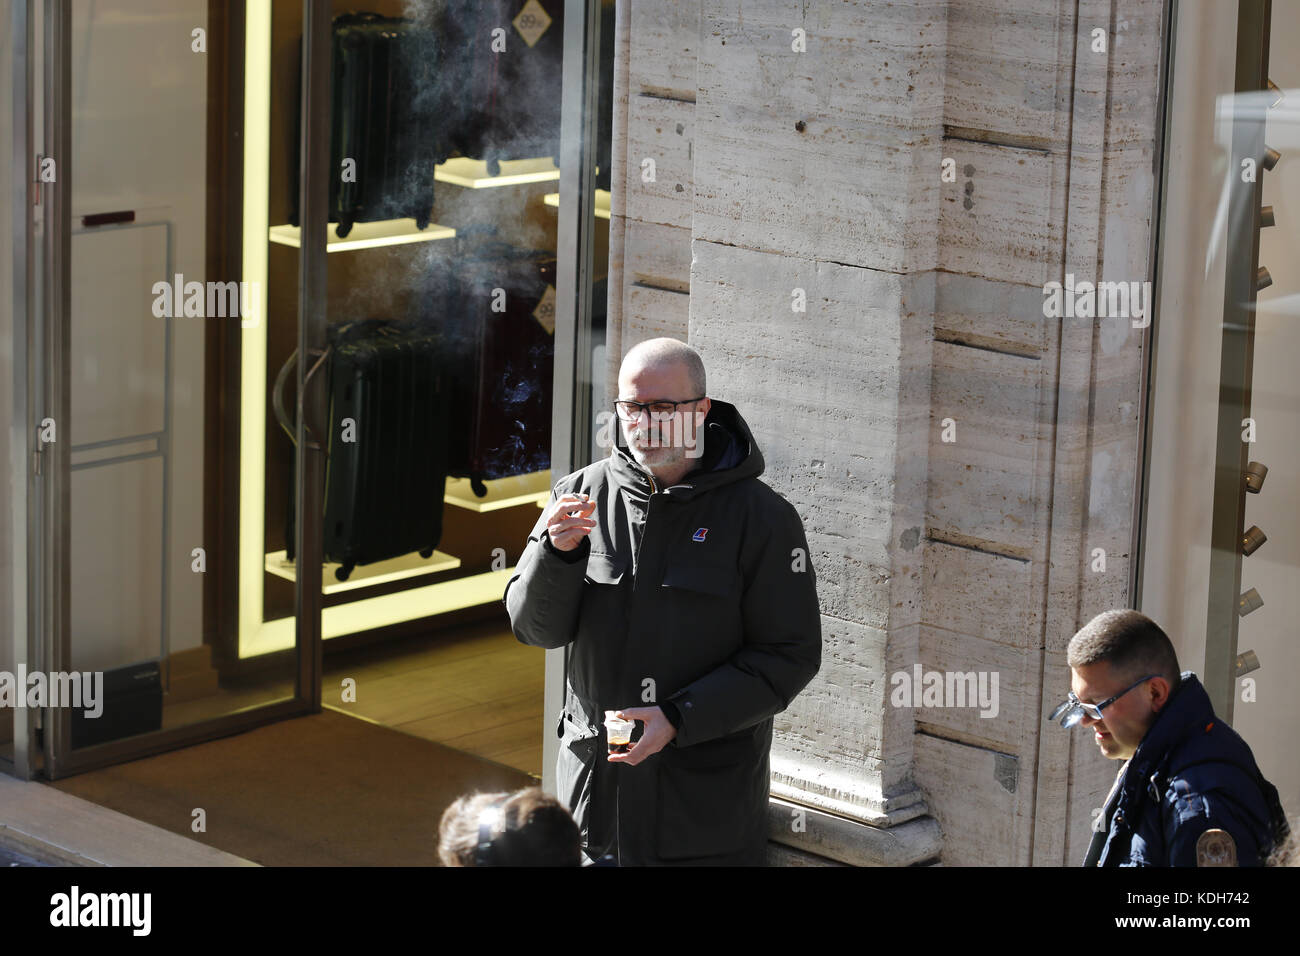 Man smoking outside a building. A cloud of smoke hangs in the air. Stock Photo